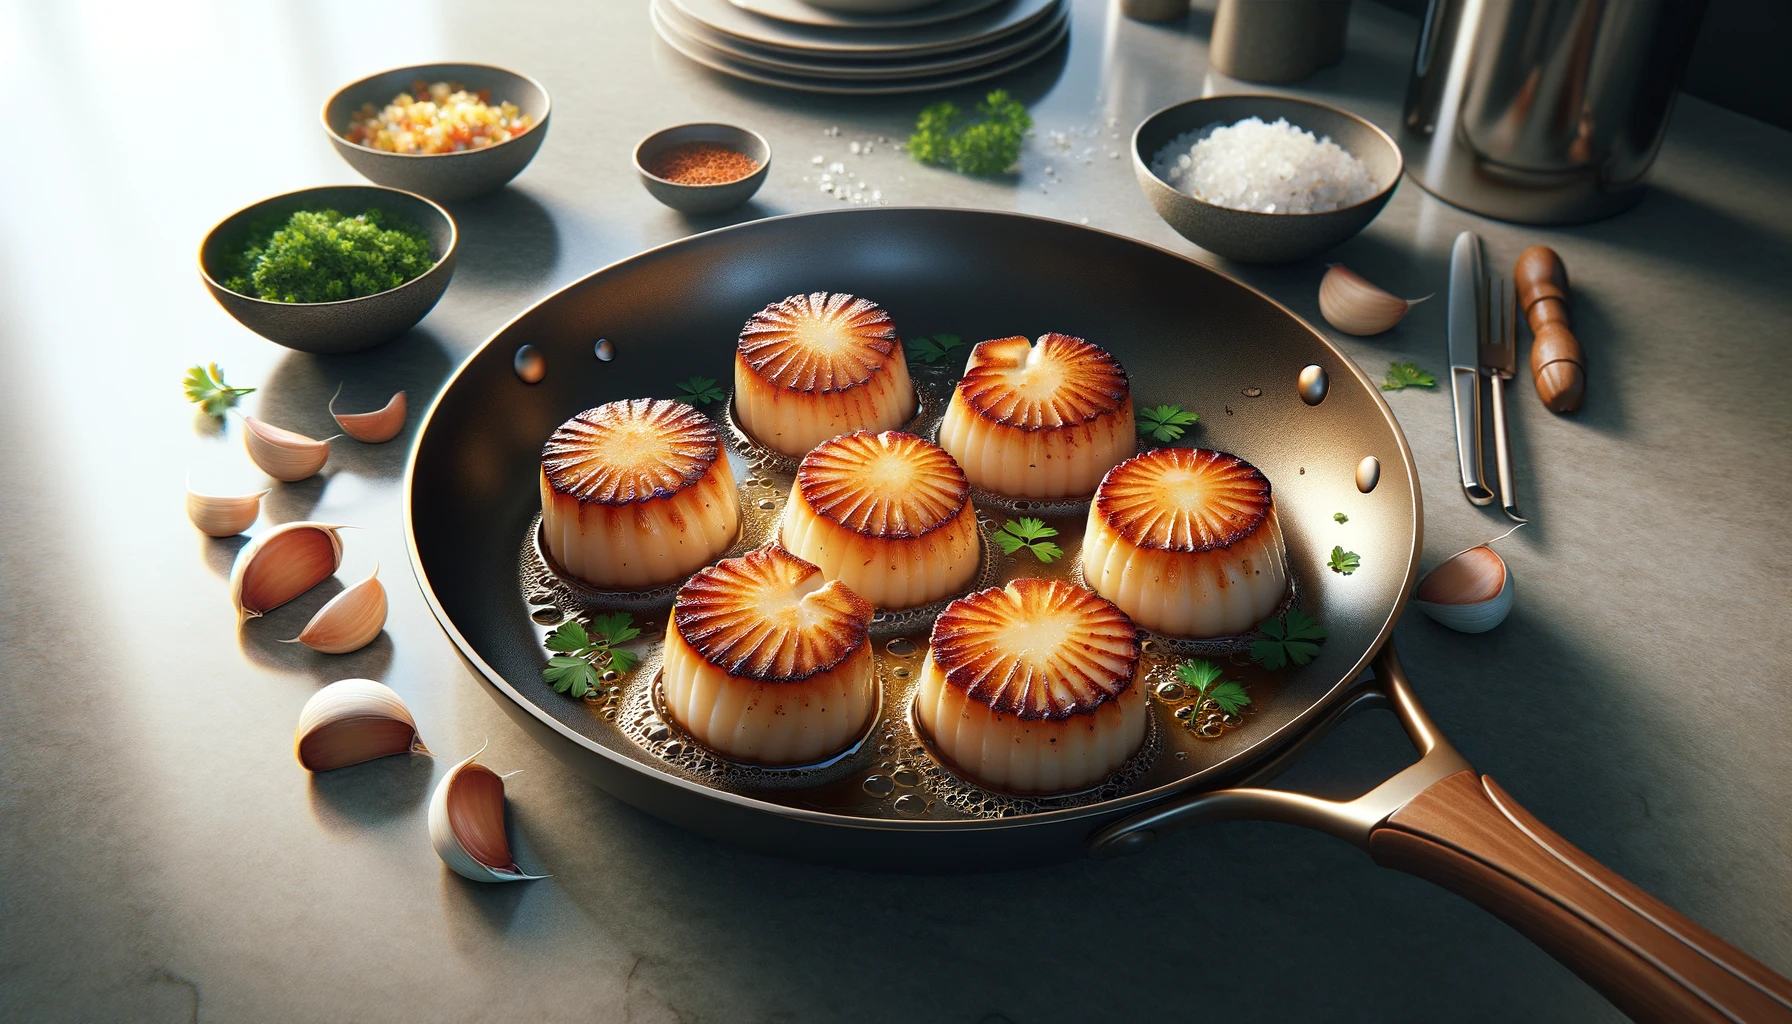 How to Cook Scallops?